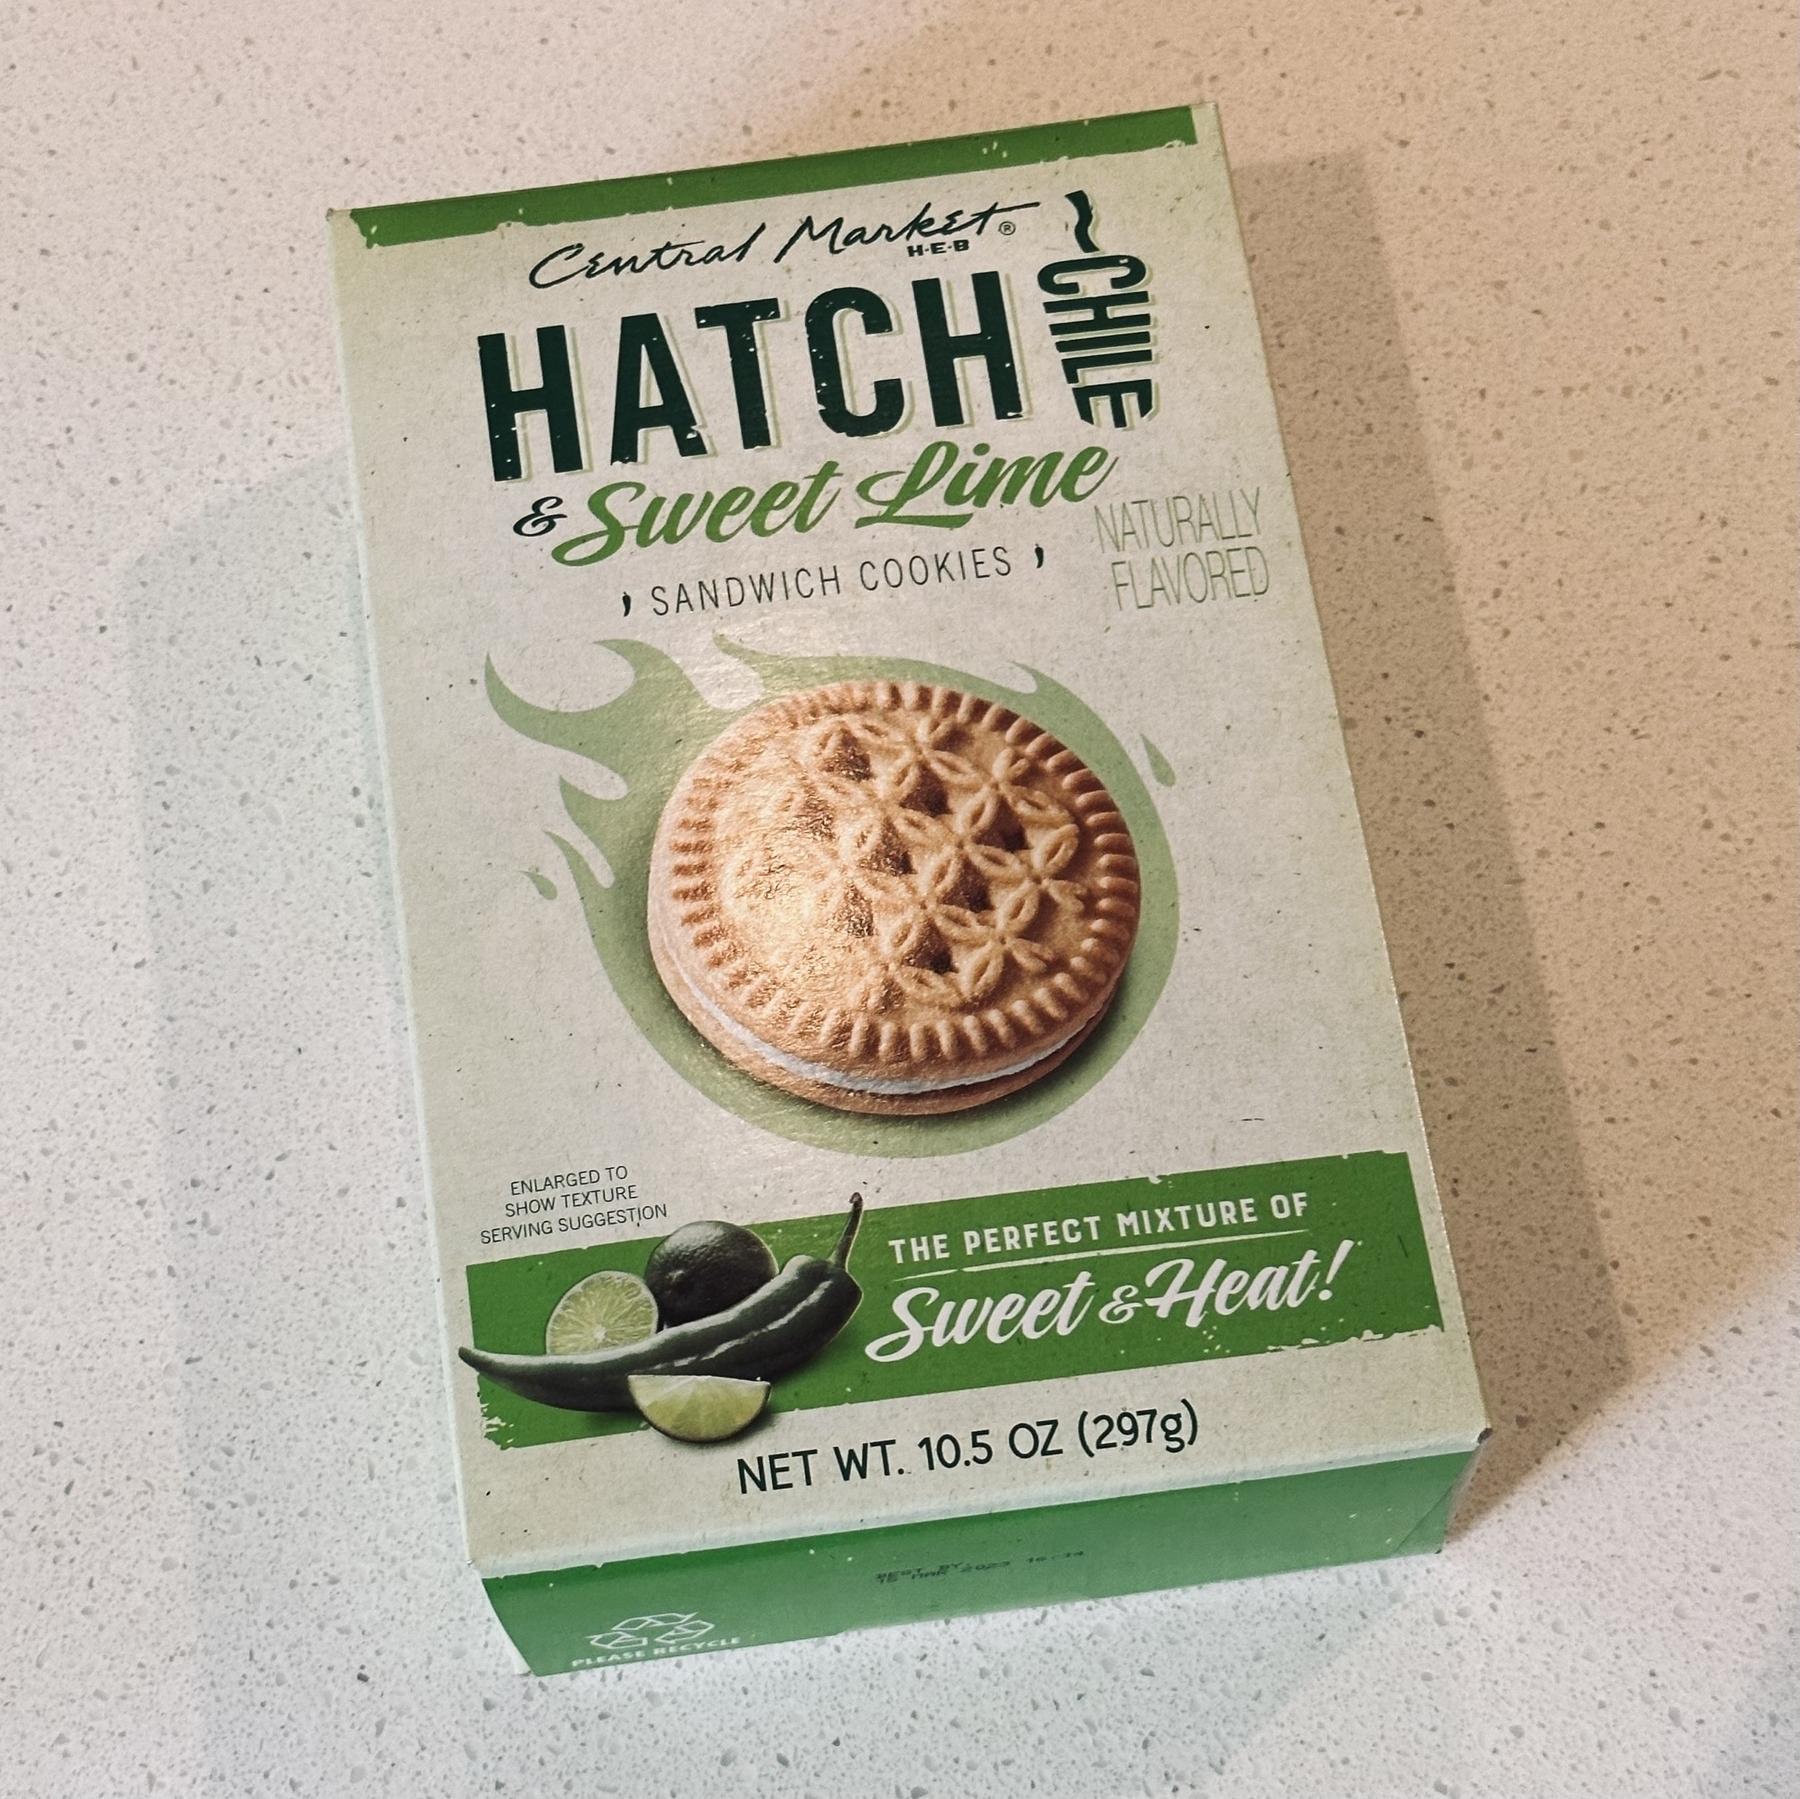 Hatch chile and sweet lime sandwich cookies.